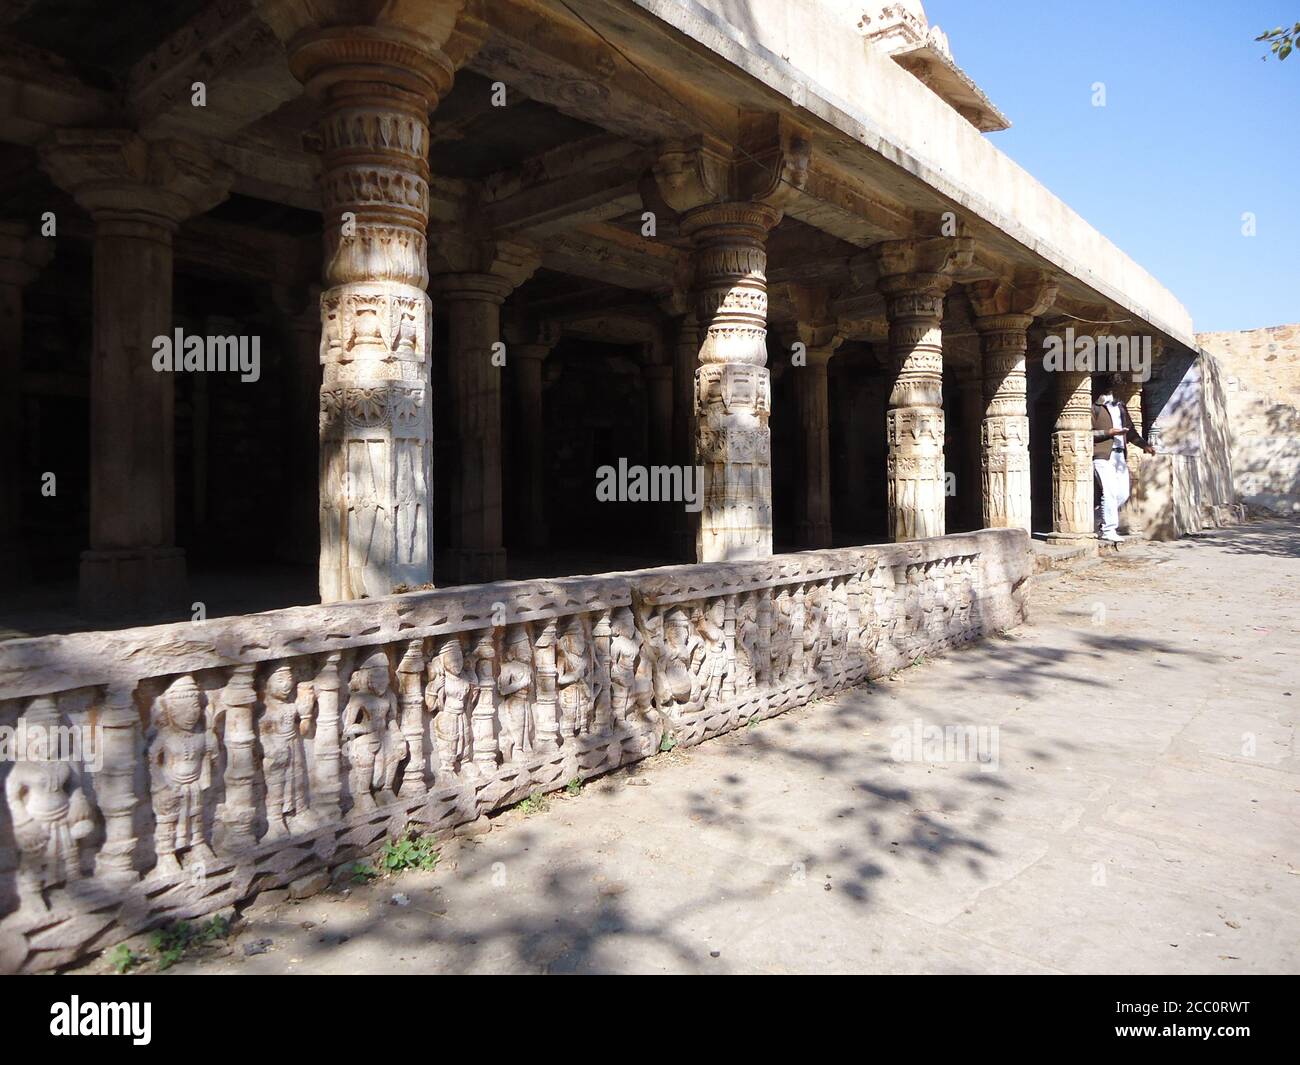 stone carving at chittorgarh fort rajasthan Stock Photo